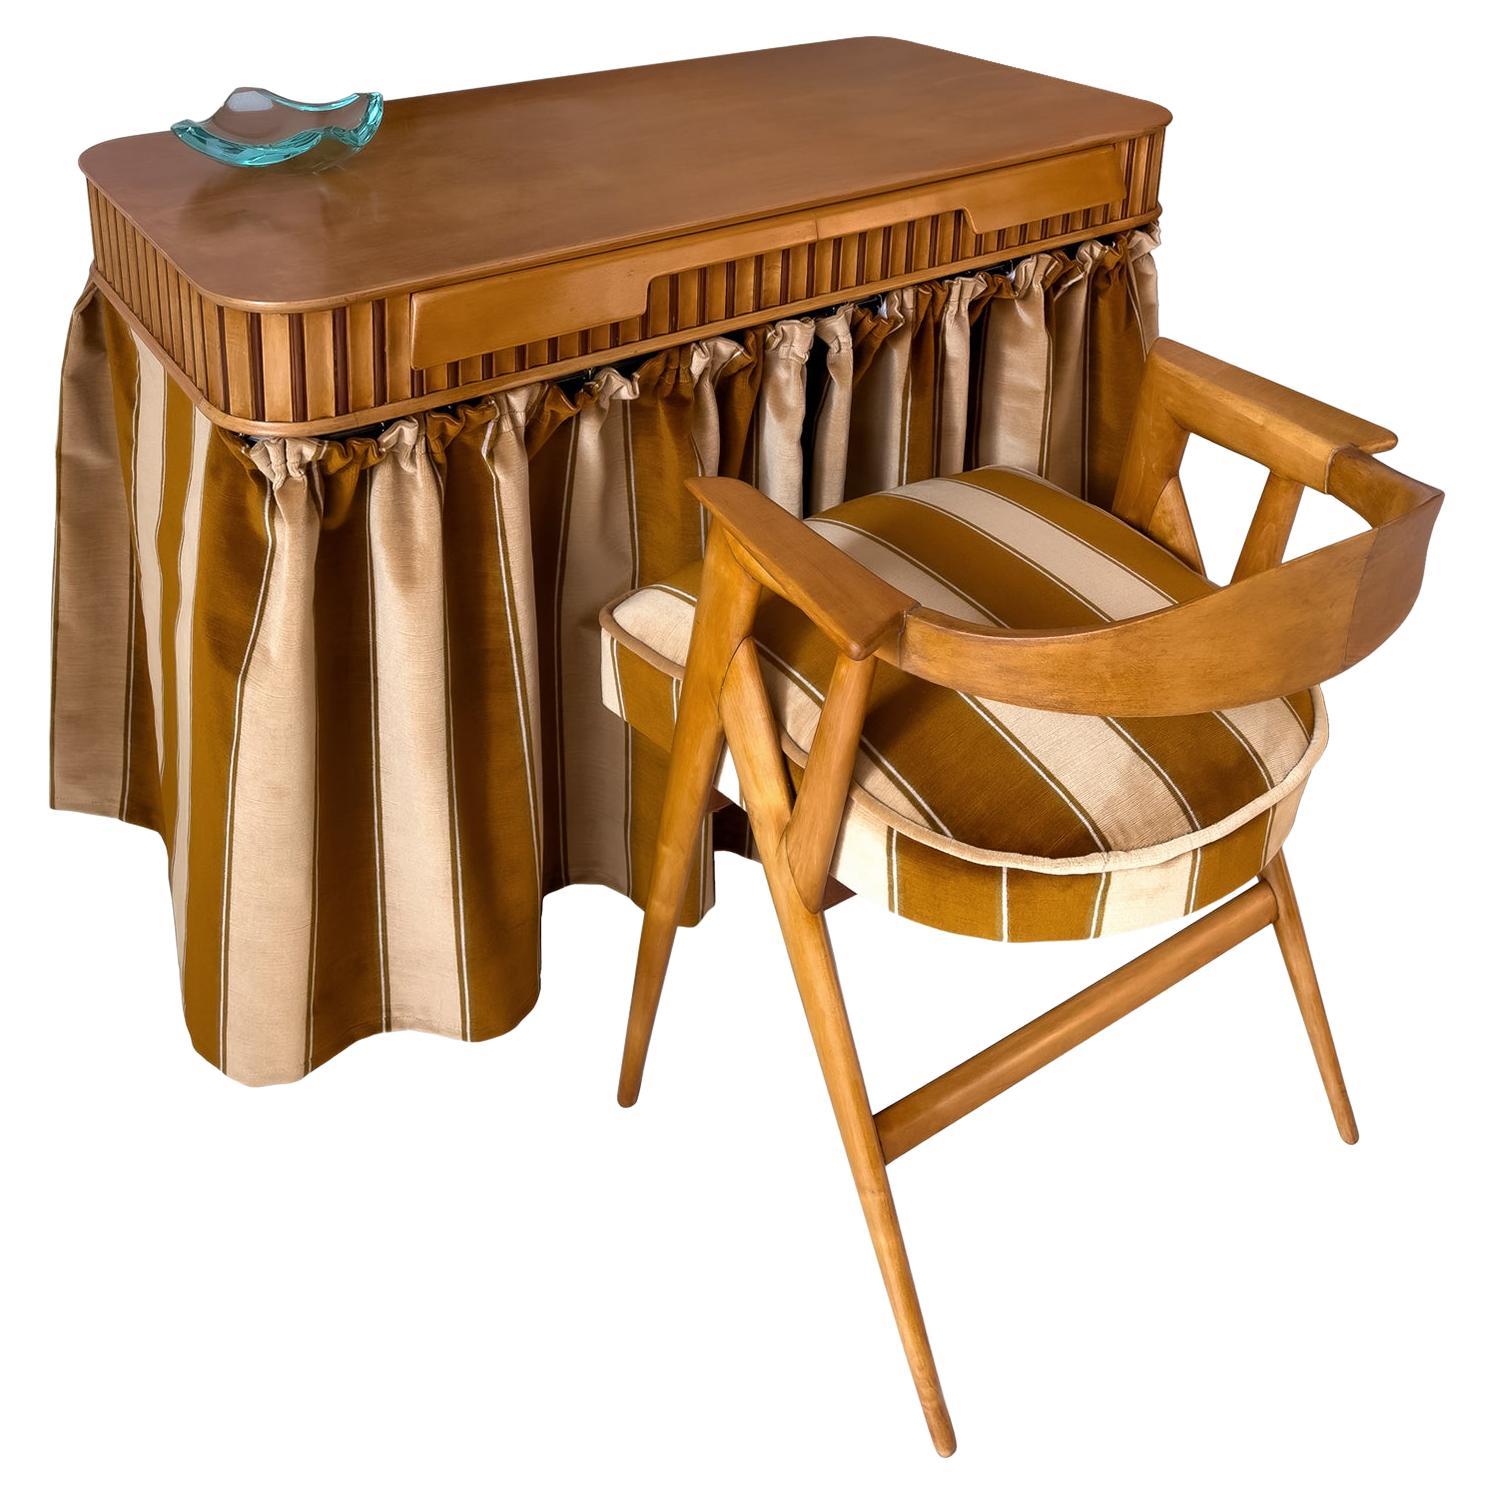 Italian Midcentury Vanity Table with Armchair by Vittorio Dassi, 1950s For Sale